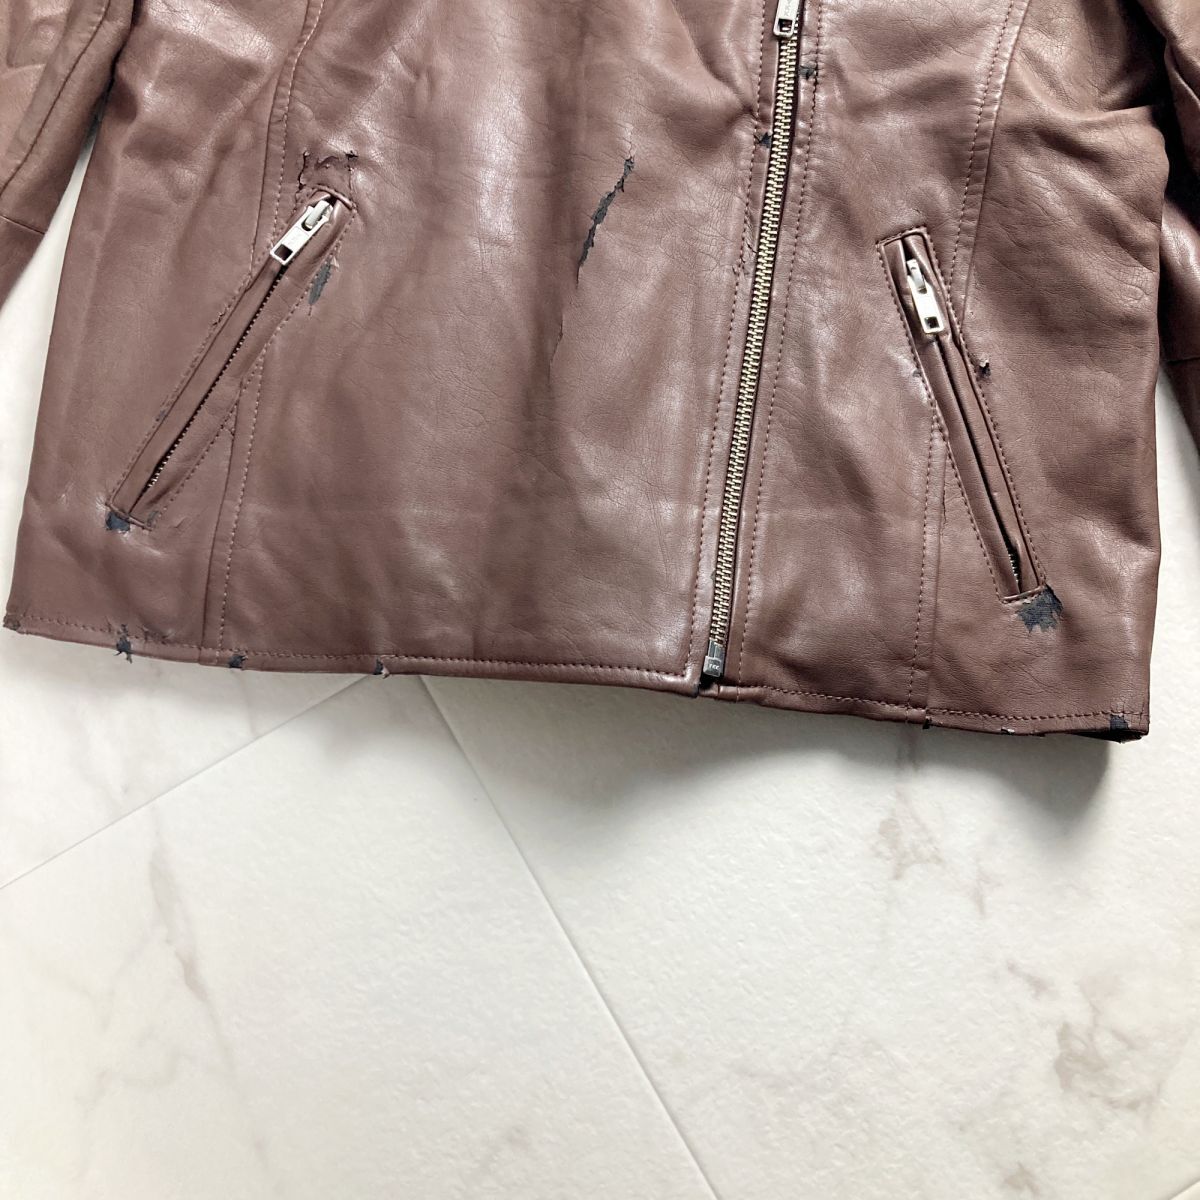 URBAN RESEARCH Urban Research rider's jacket leather jacket outer lady's Brown size S*NC1400